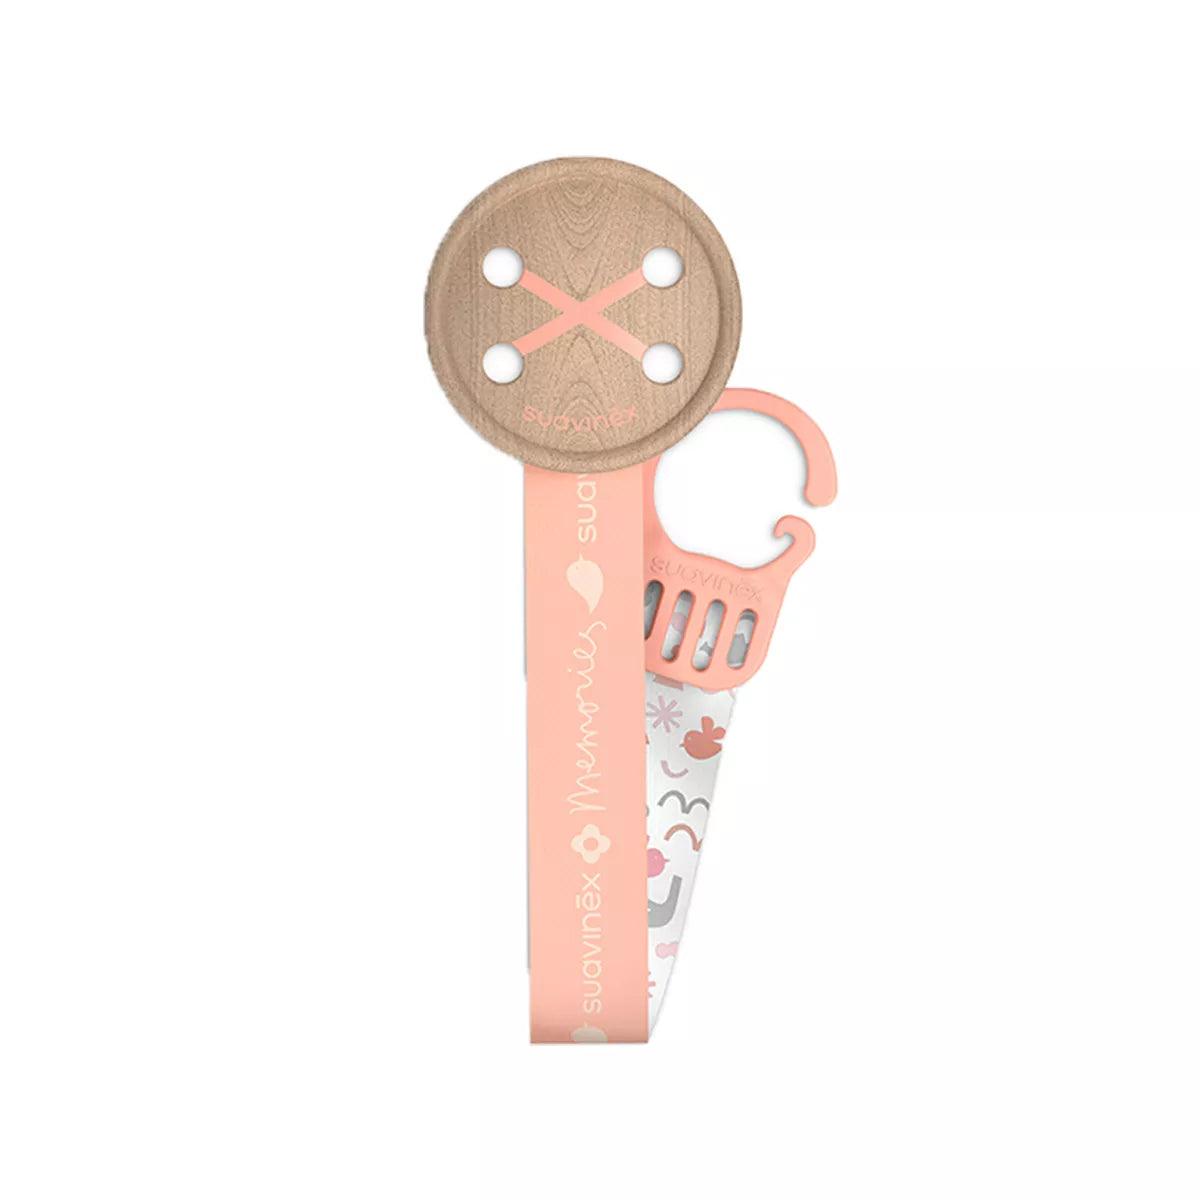 Soother Clip with Ribbon 0m+ - GOLDFARMACI